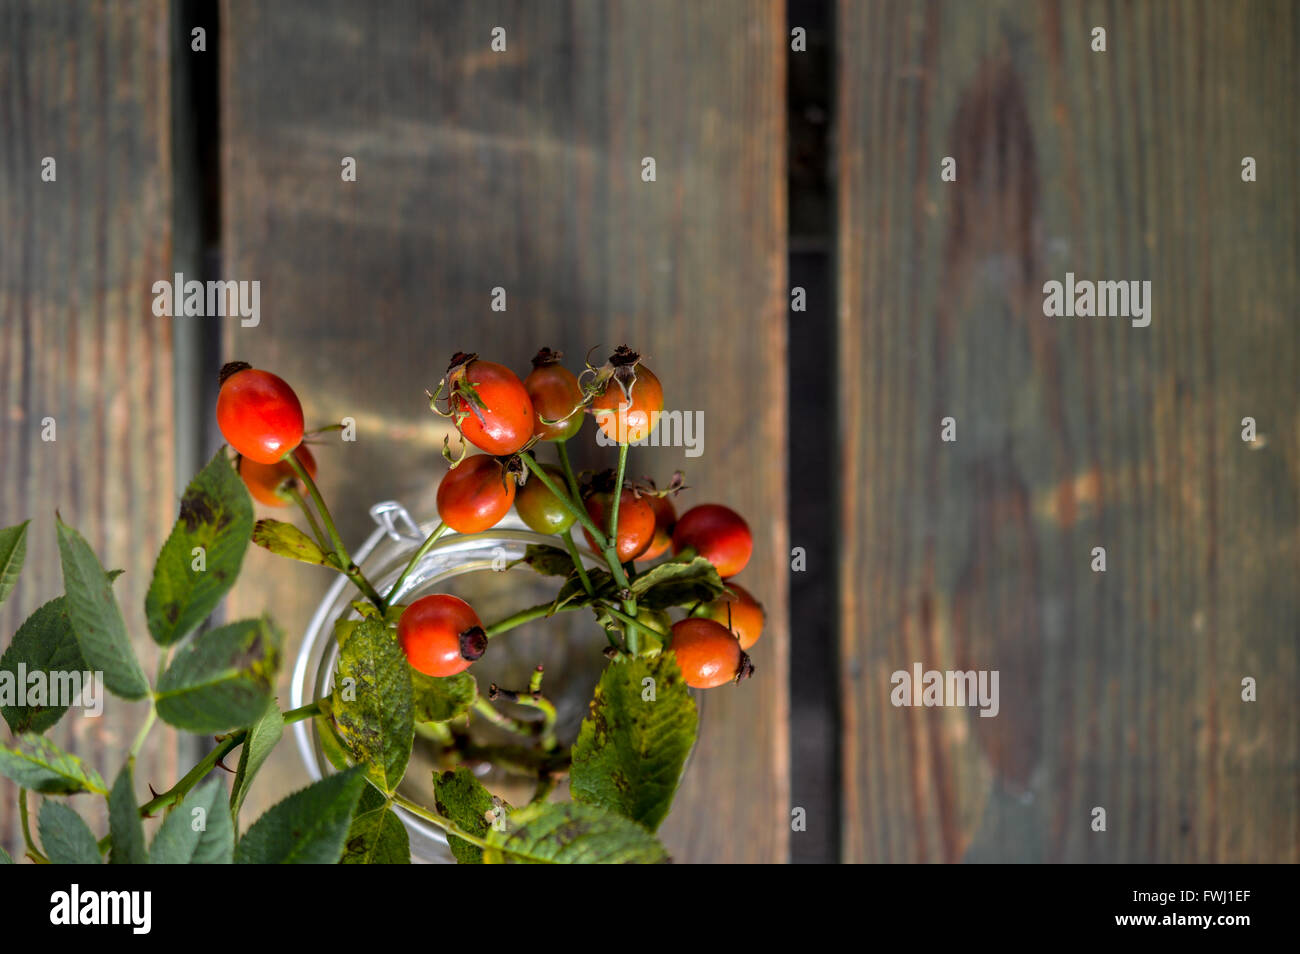 rose hip from rose flower in a jar on kitchen table Stock Photo